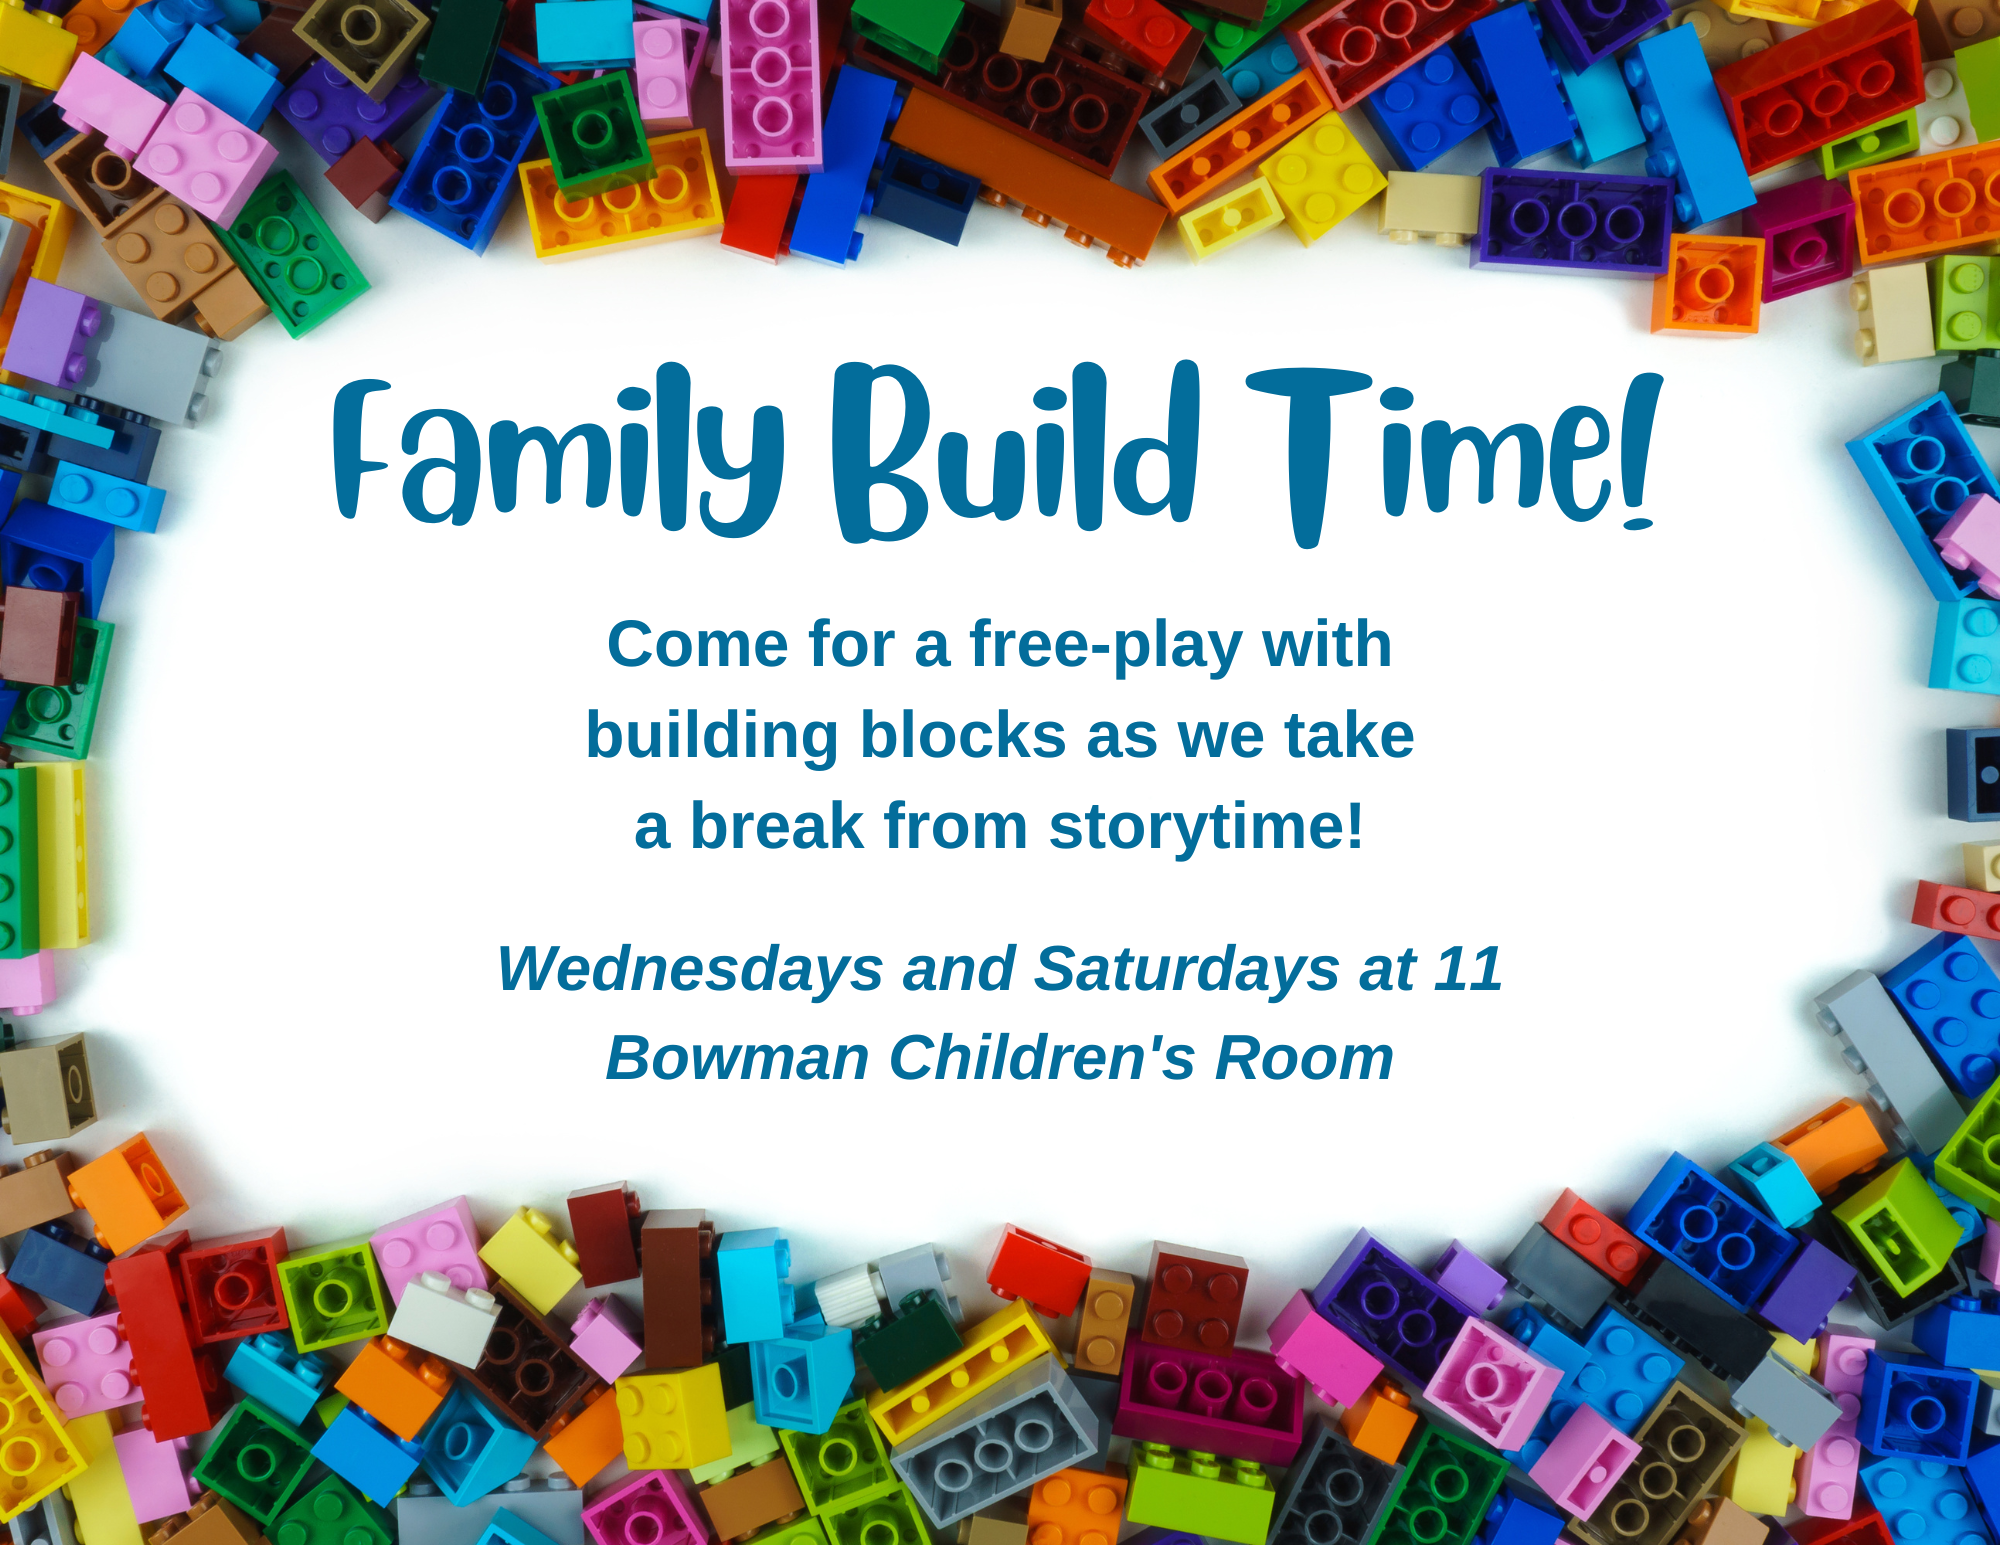 Family Build Time promotional poster with a border made of Legos